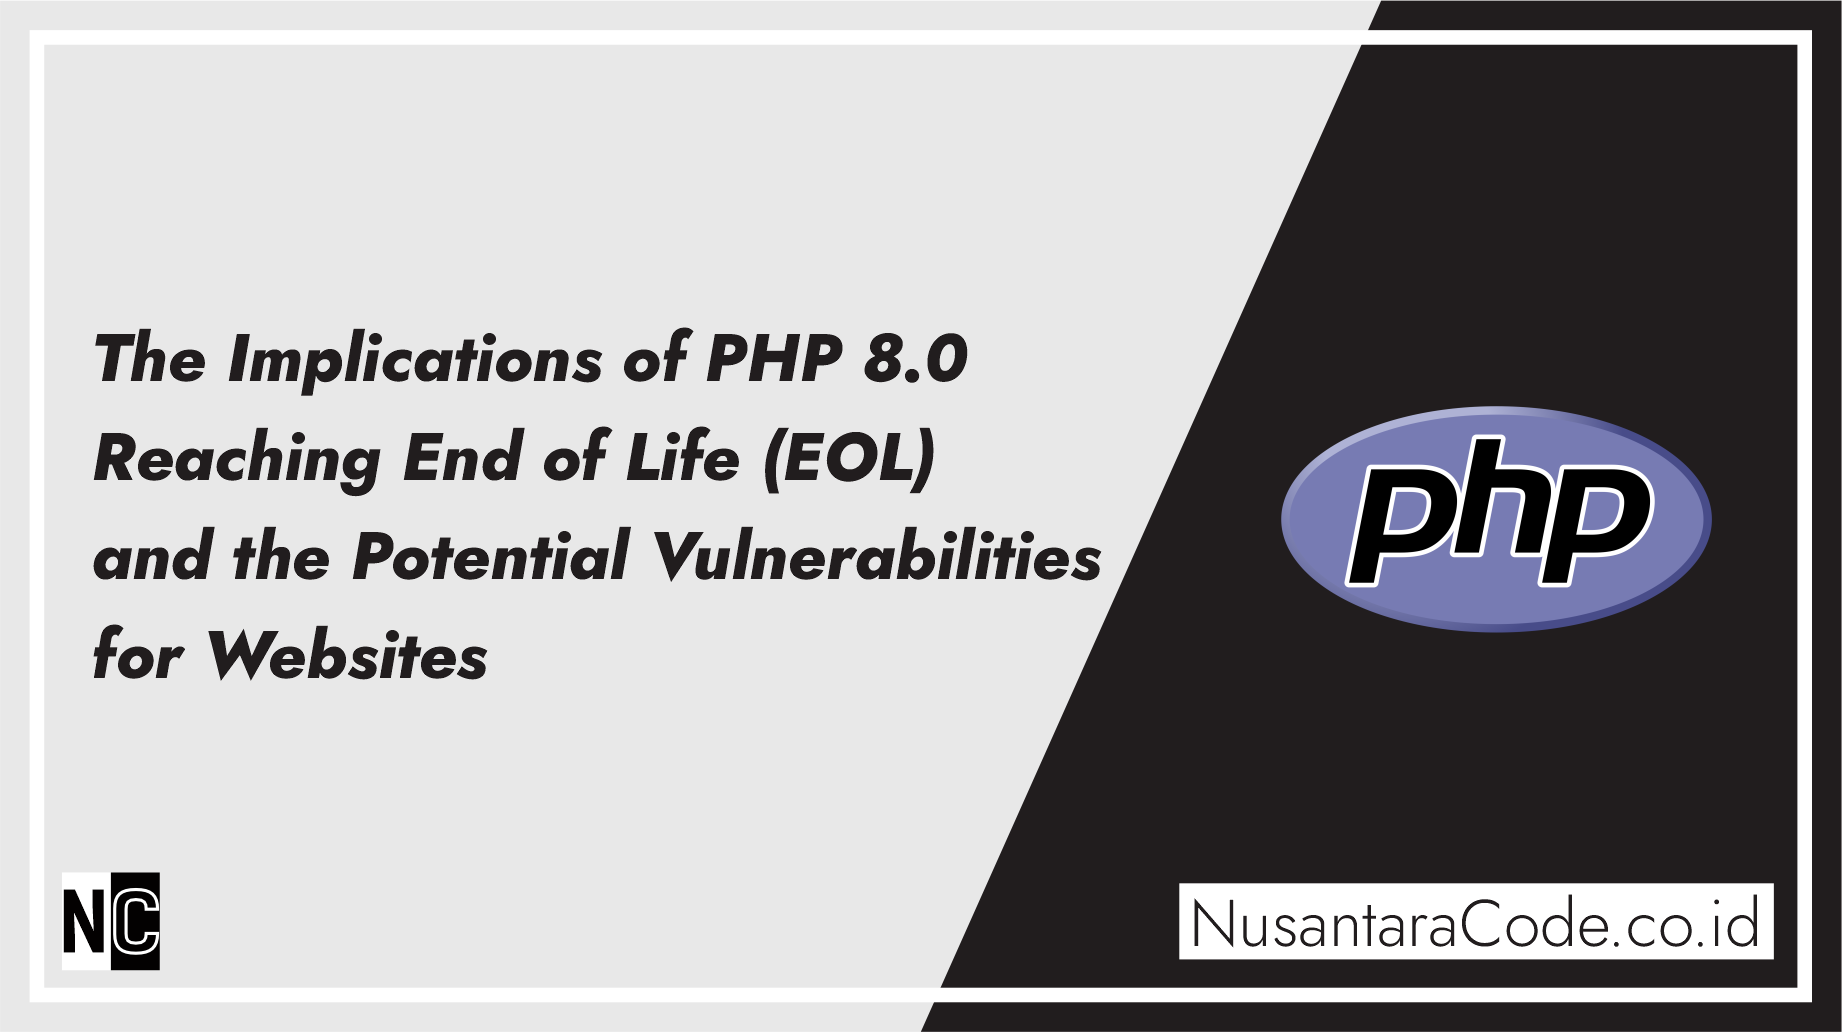 The Implications of PHP 8.0 Reaching End of Life (EOL) and the Potential Vulnerabilities for Websites